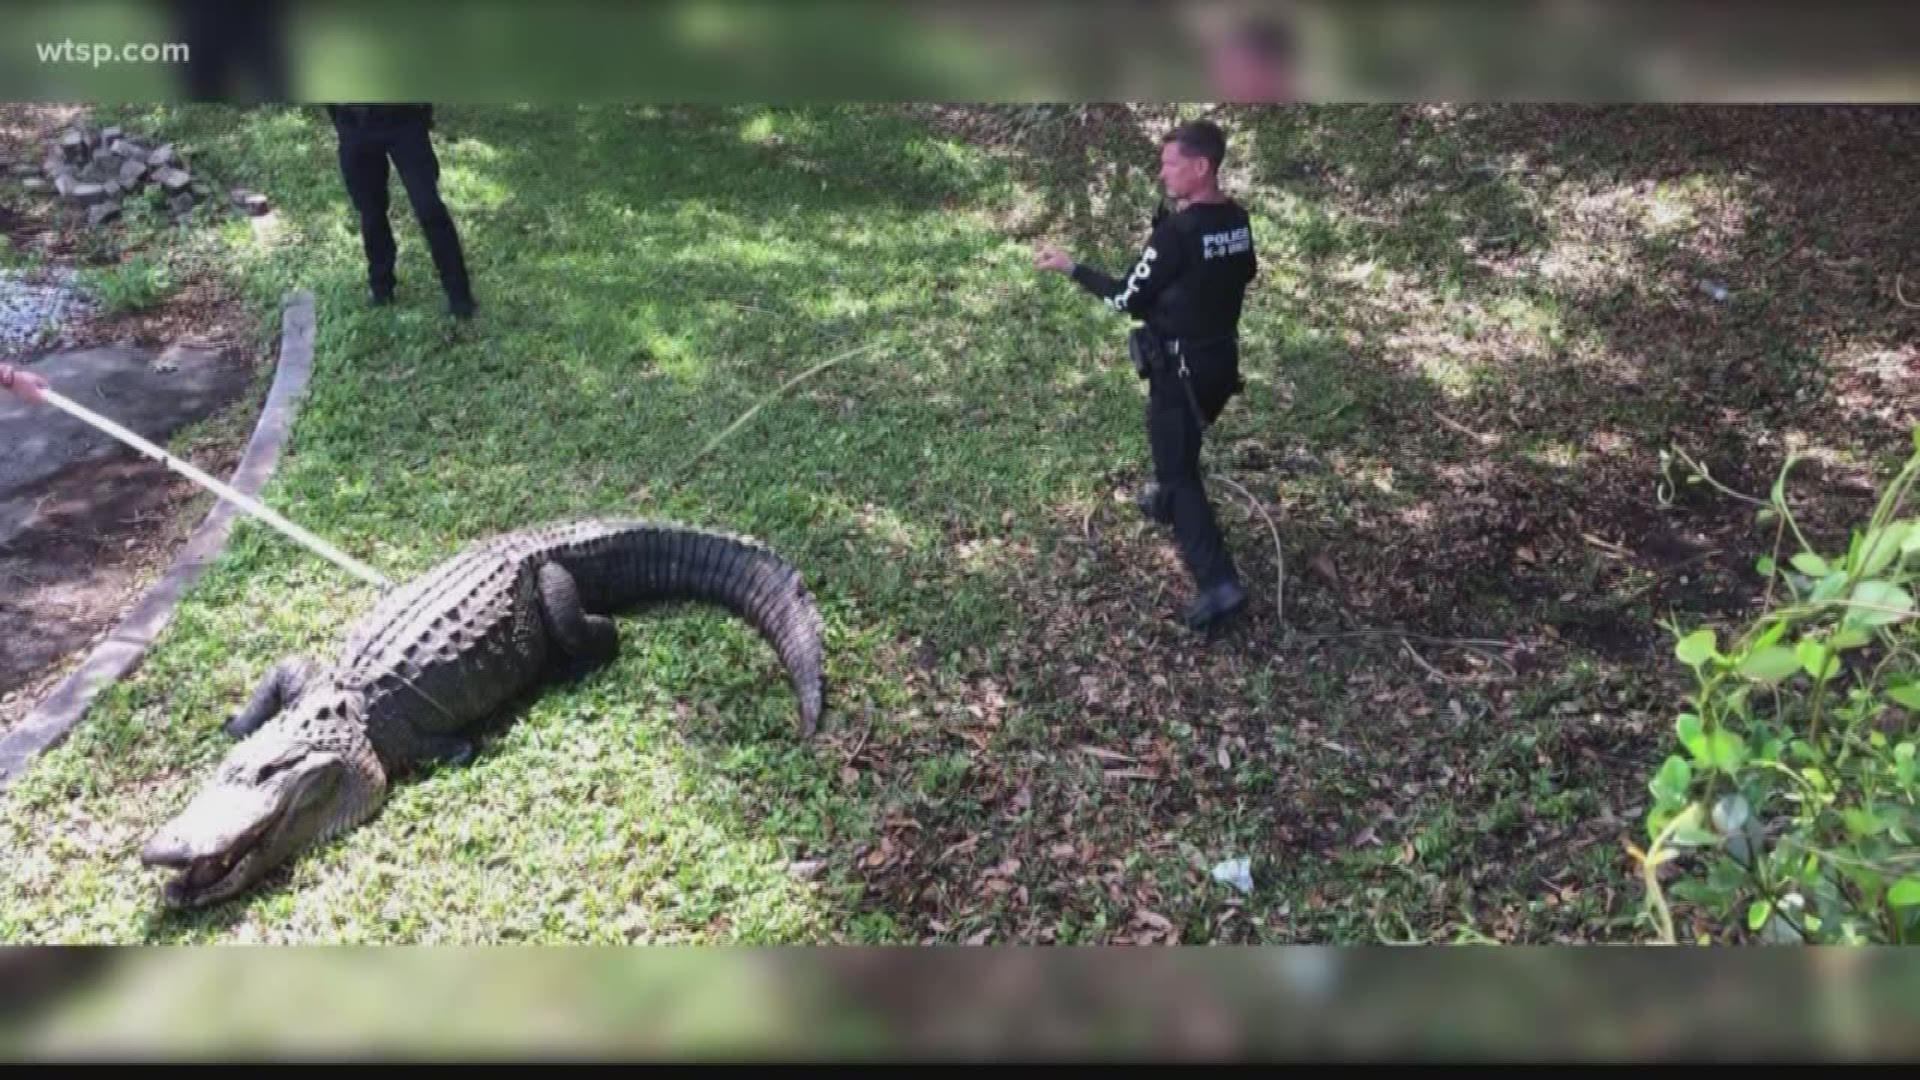 Police in Florida recently came face-to-face with an alligator thought to be more than 100 years old. That means Woodrow Wilson would have been president when the gator started wandering around the Sunshine State.

The nearly 12-foot-long gator weighs more than 750 pounds.